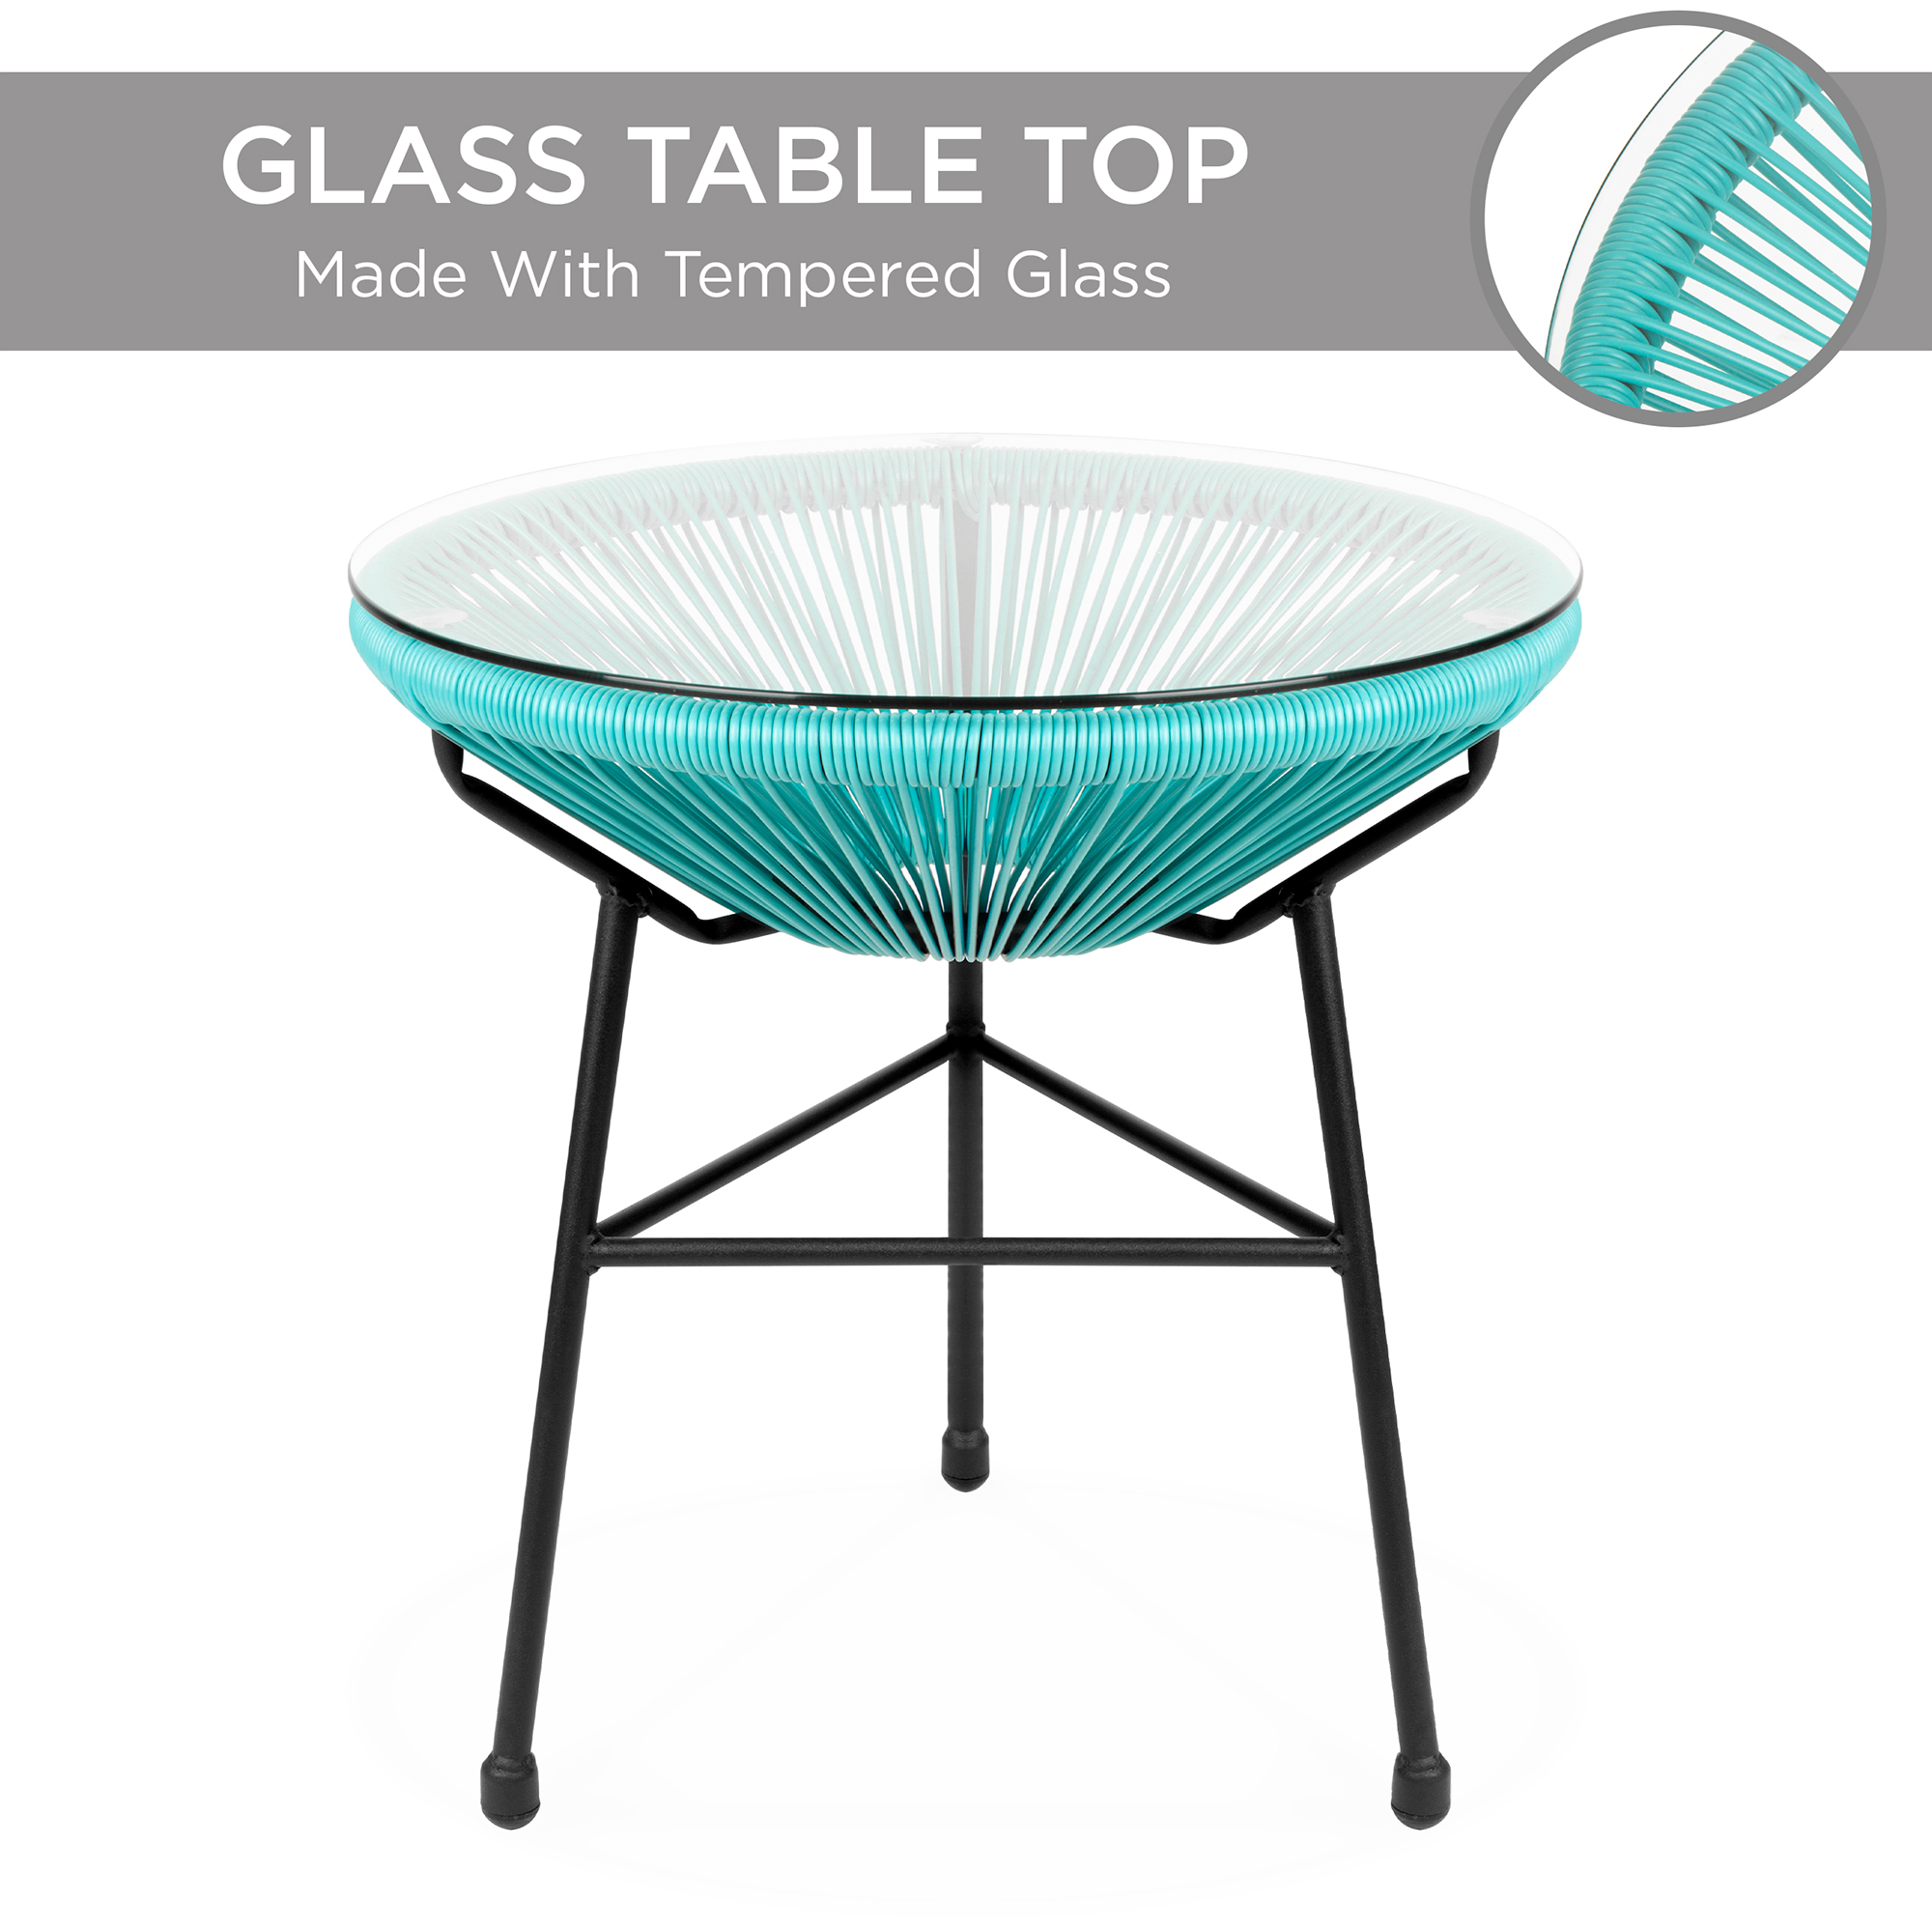 Best Choice Products 3-Piece All-Weather Patio Acapulco Bistro Furniture Set w/ Rope, Glass Top Table - Light Blue - image 5 of 7